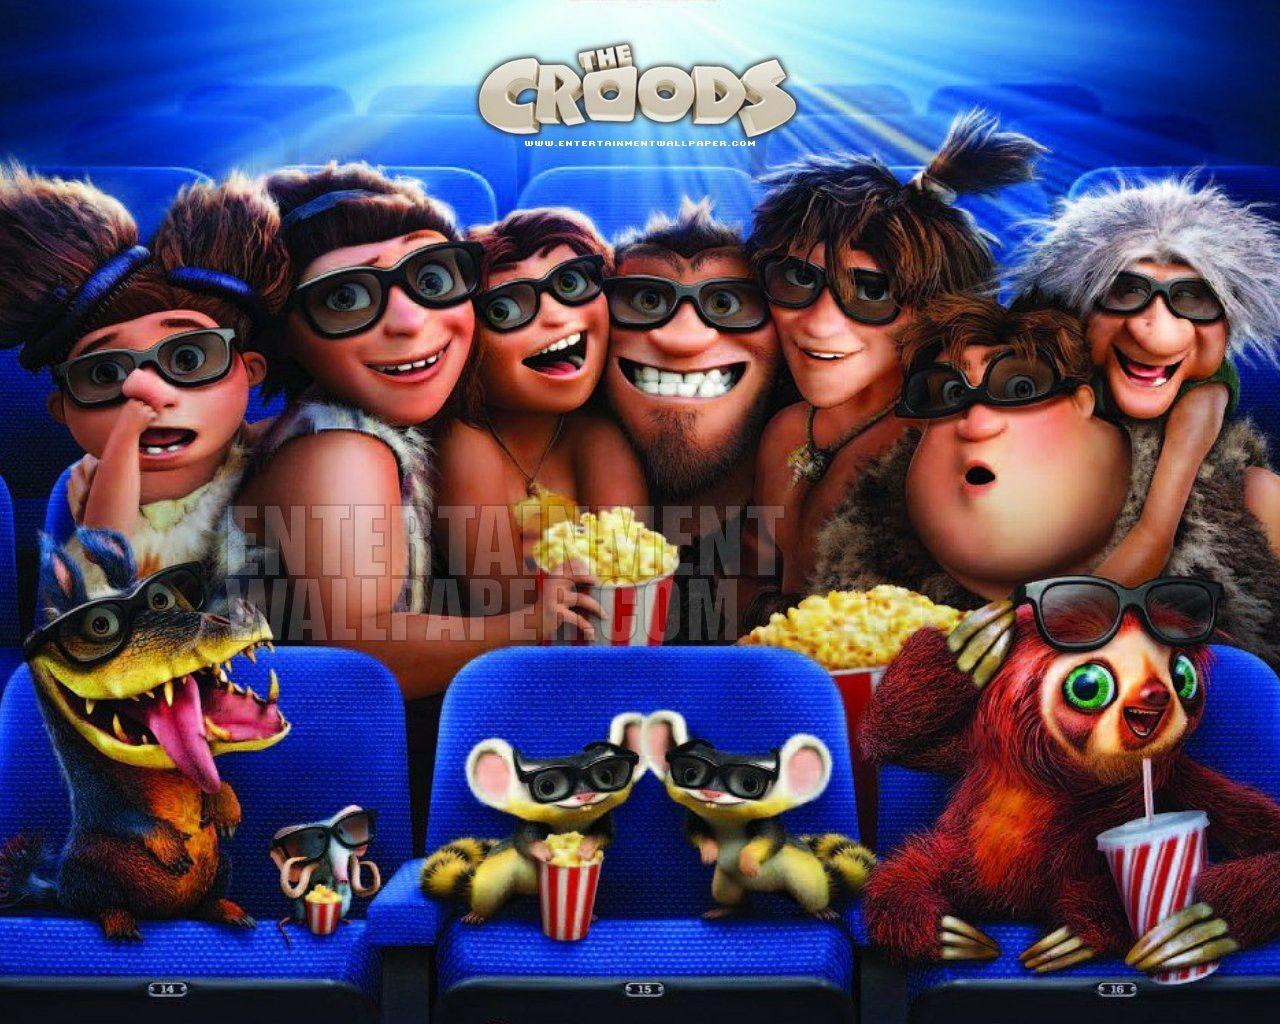 The Croods Photo Croods Image: Ravepad place to rave